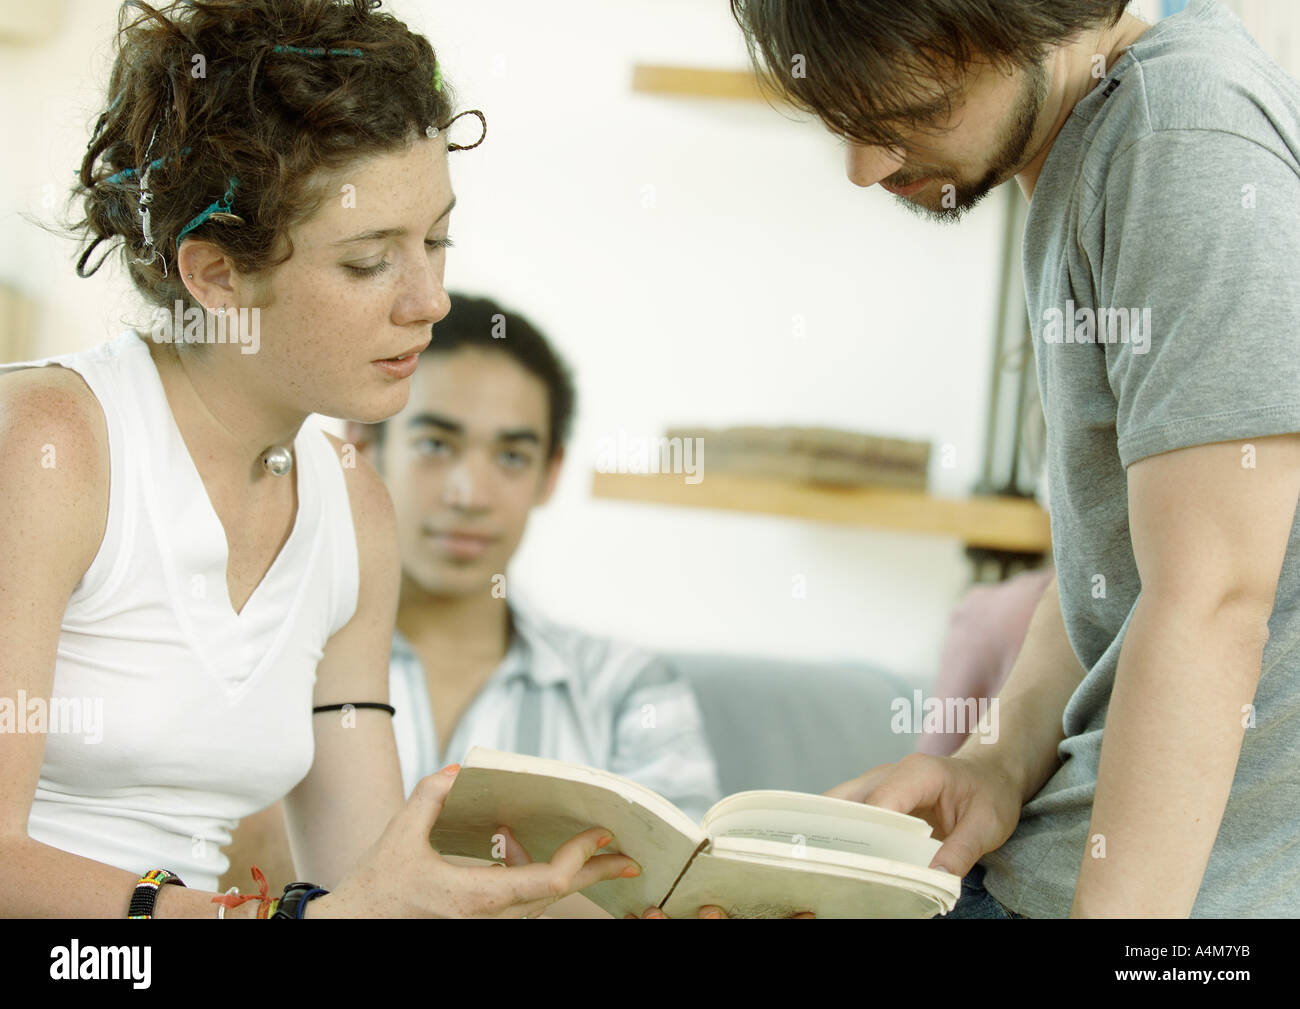 Young people looking at book together Stock Photo